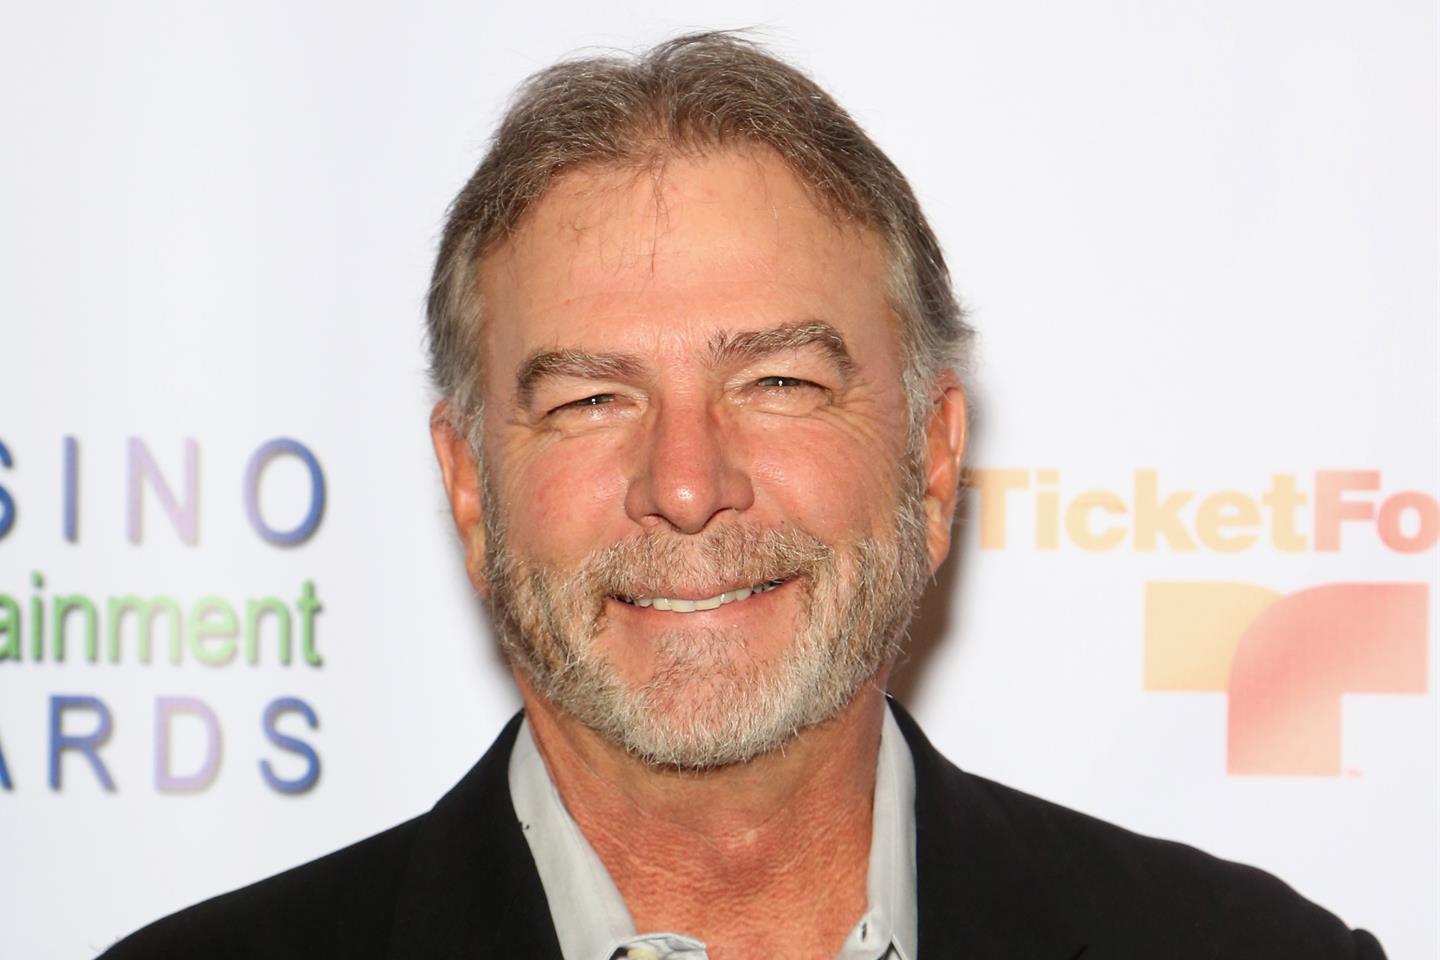 Bill Engvall Tickets Buy or Sell Tickets for Bill Engvall Tour Dates